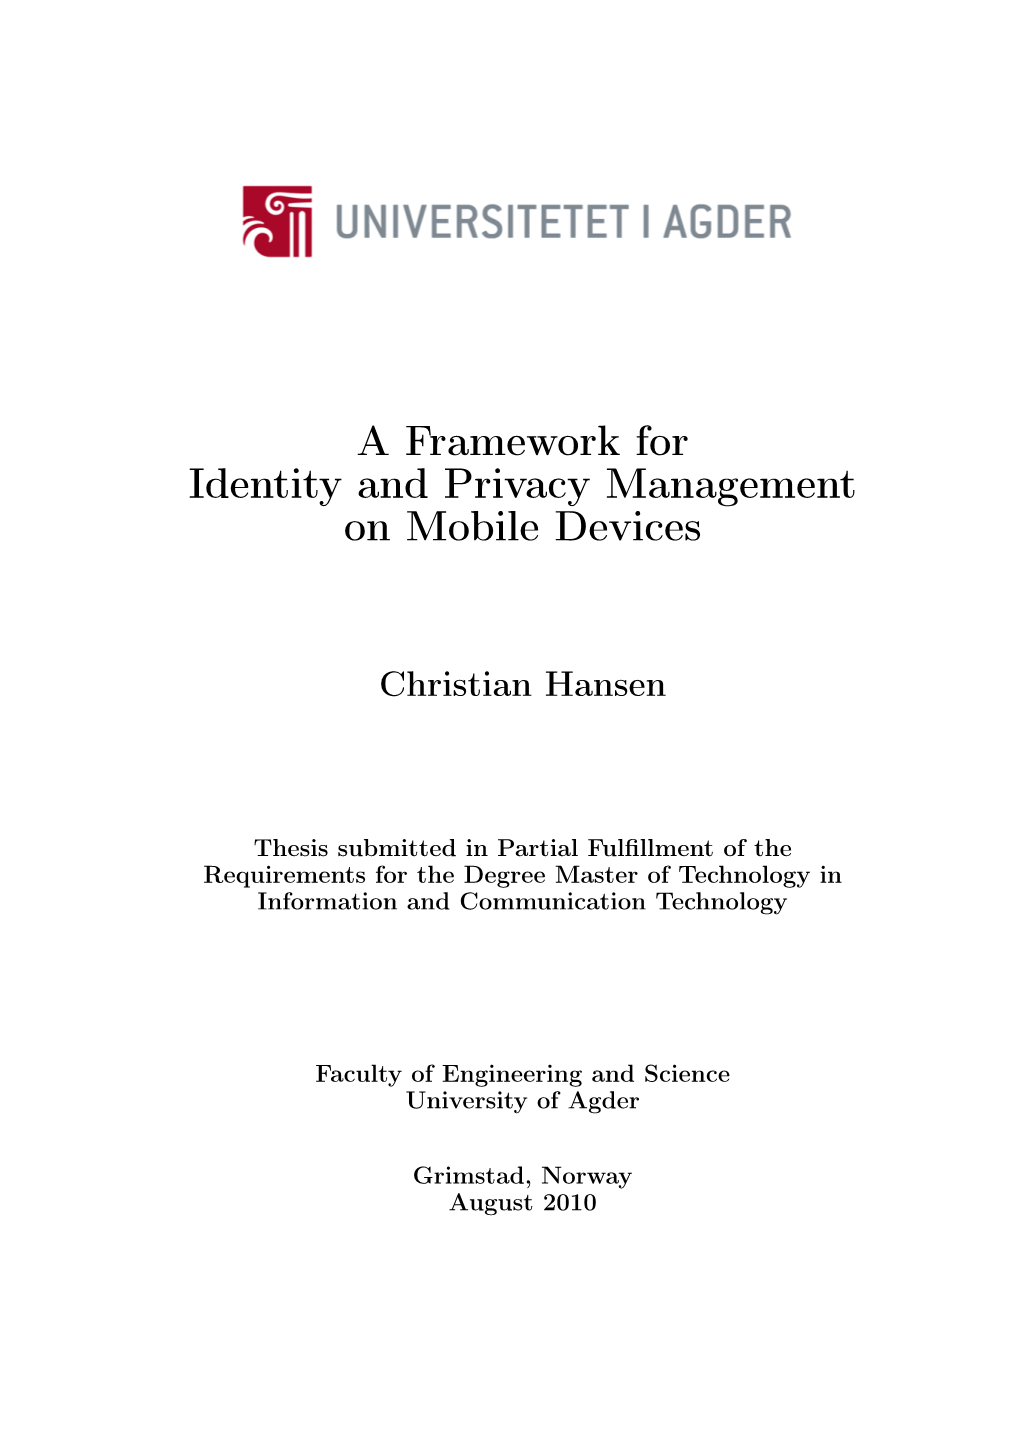 A Framework for Identity and Privacy Management on Mobile Devices